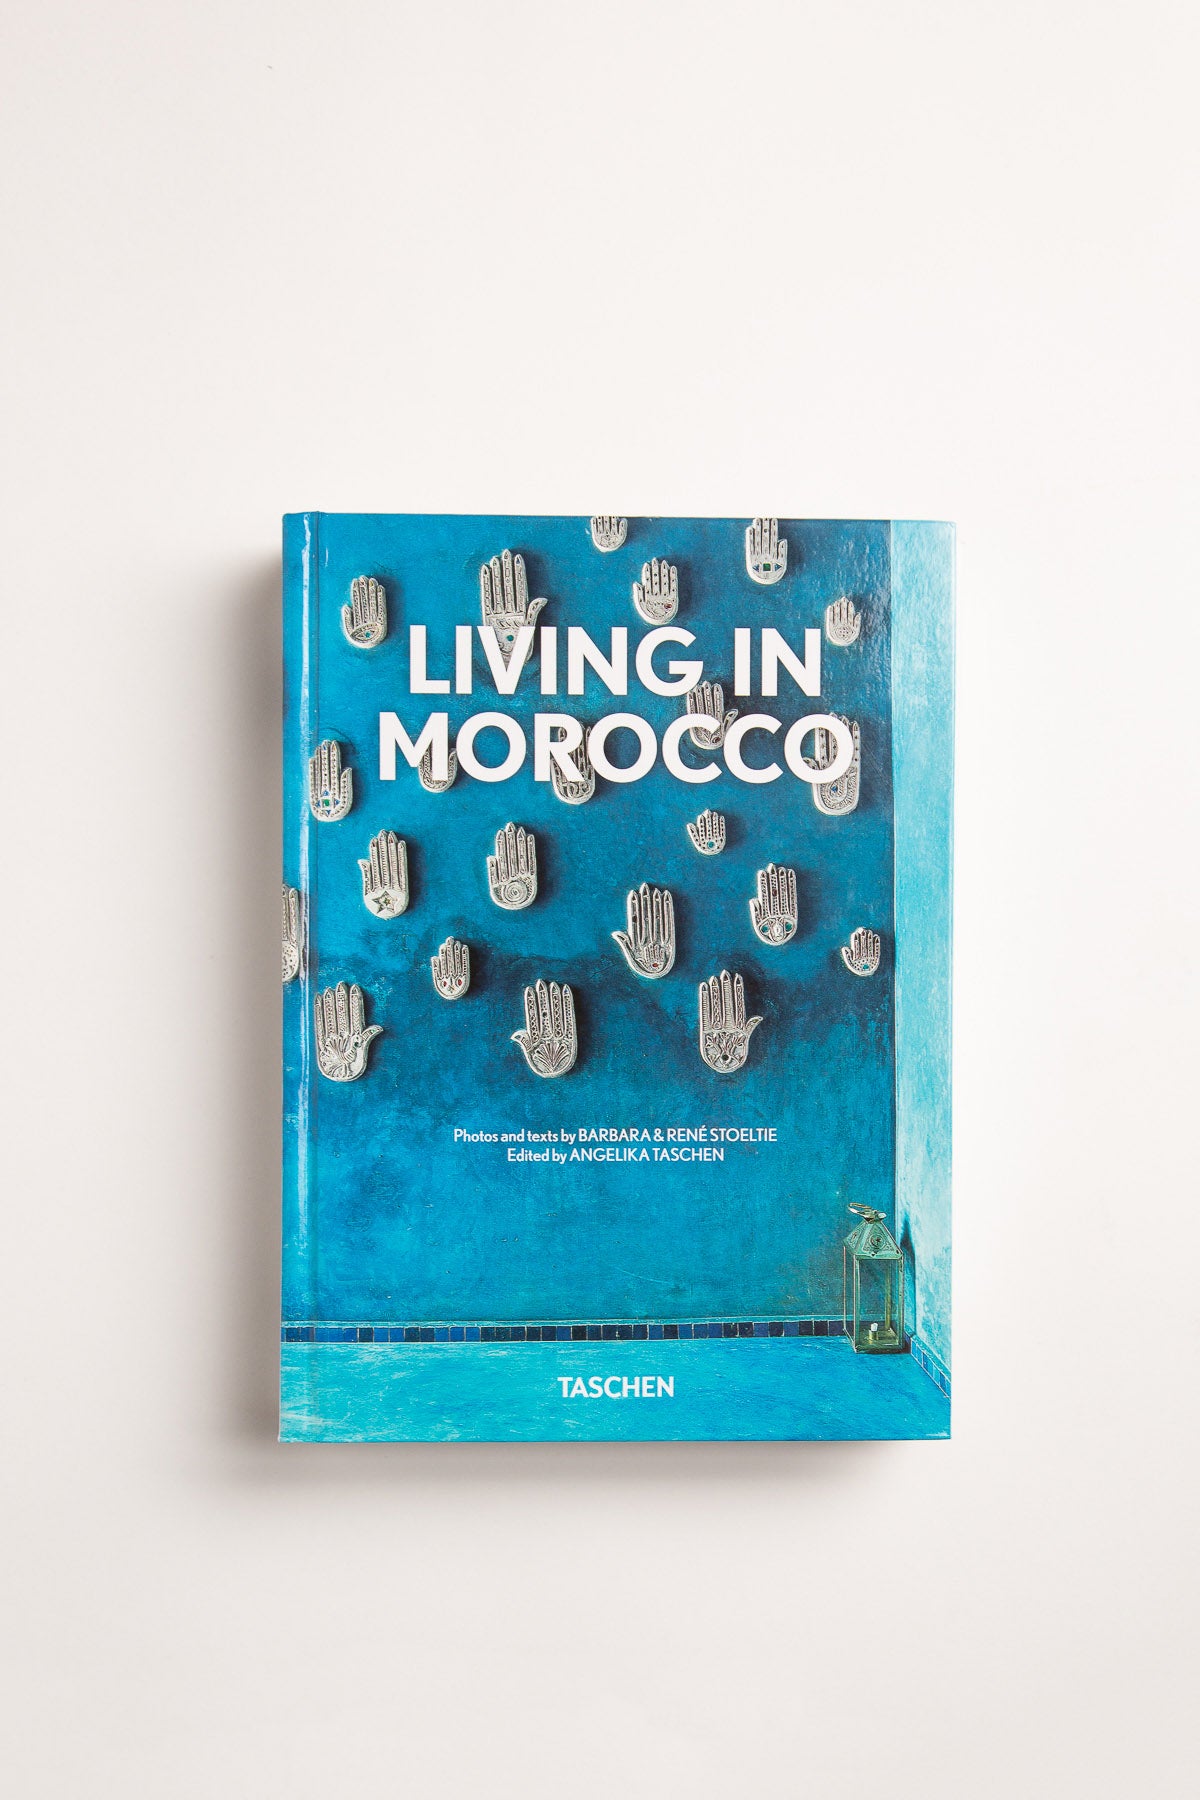 TASCHEN | LIVING IN MOROCCO 40TH EDITION